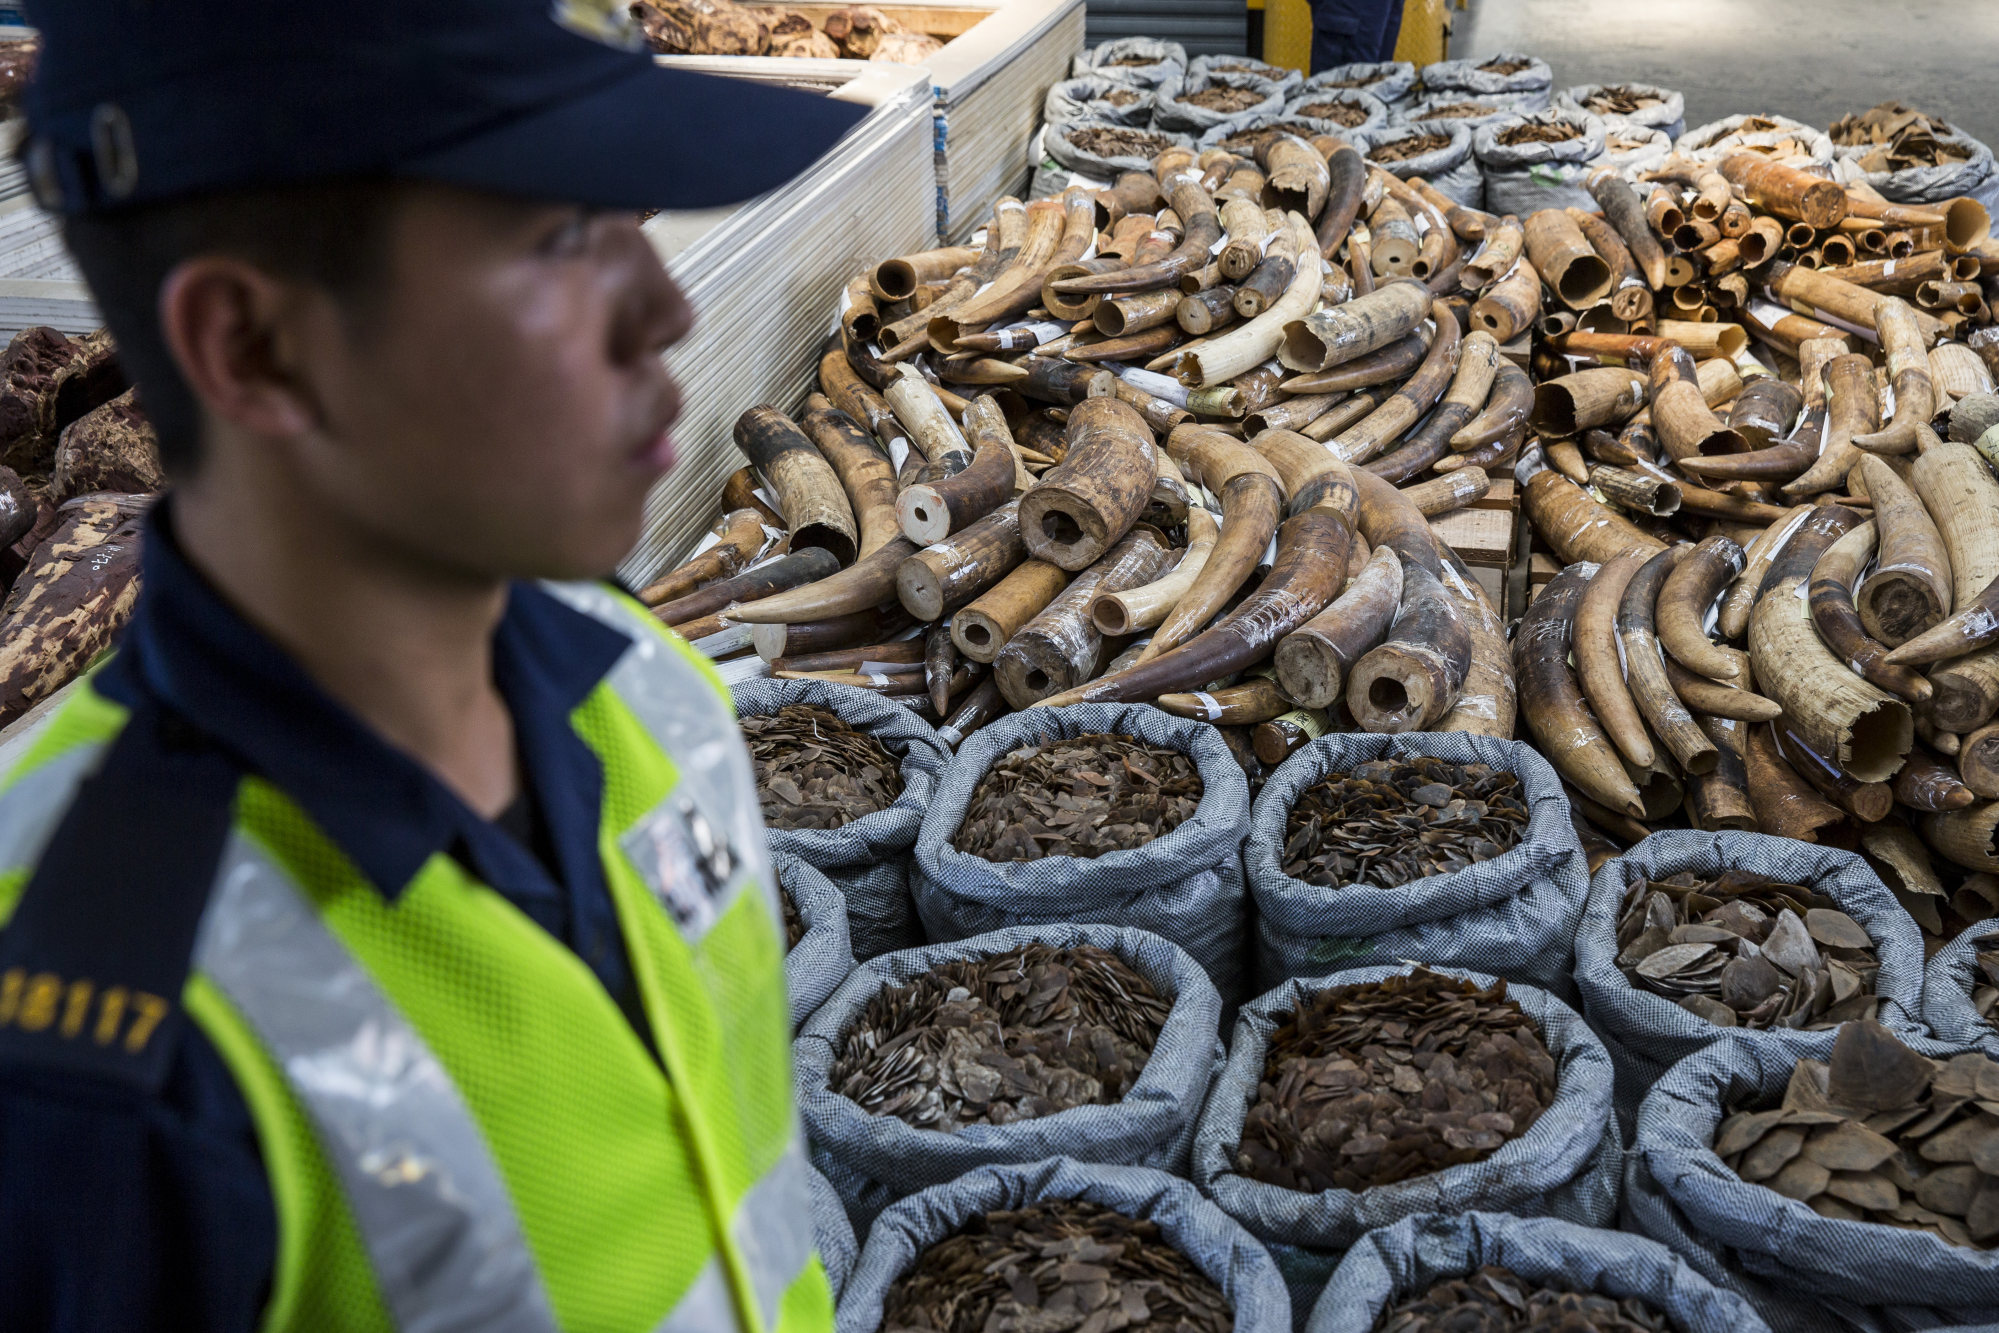 A customs officer guards a haul of endangered species products including ivory, pangolin scales and shark fins seized in a months-long joint operation with the Agriculture, Fisheries and Conservation Department in 2018. Photo: AFP